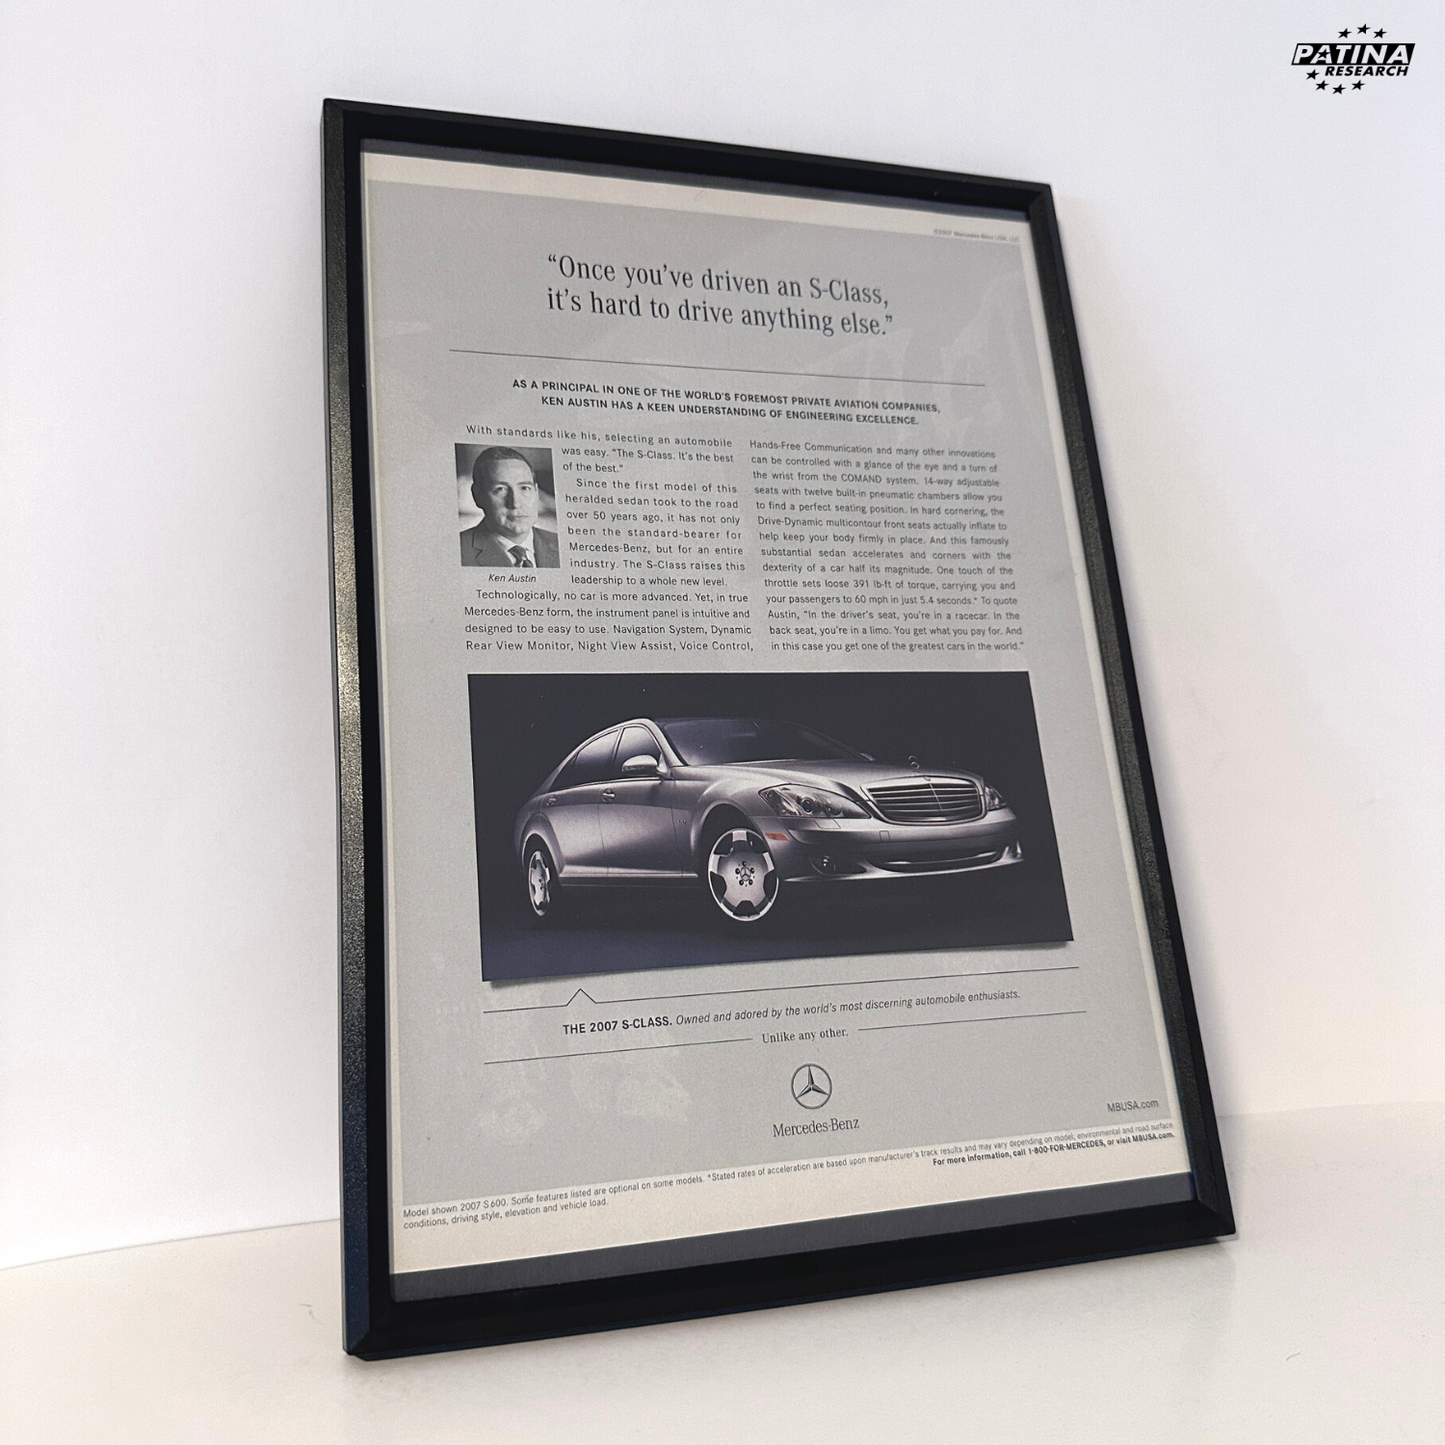 Mercedes S-class drive anything else framed ad